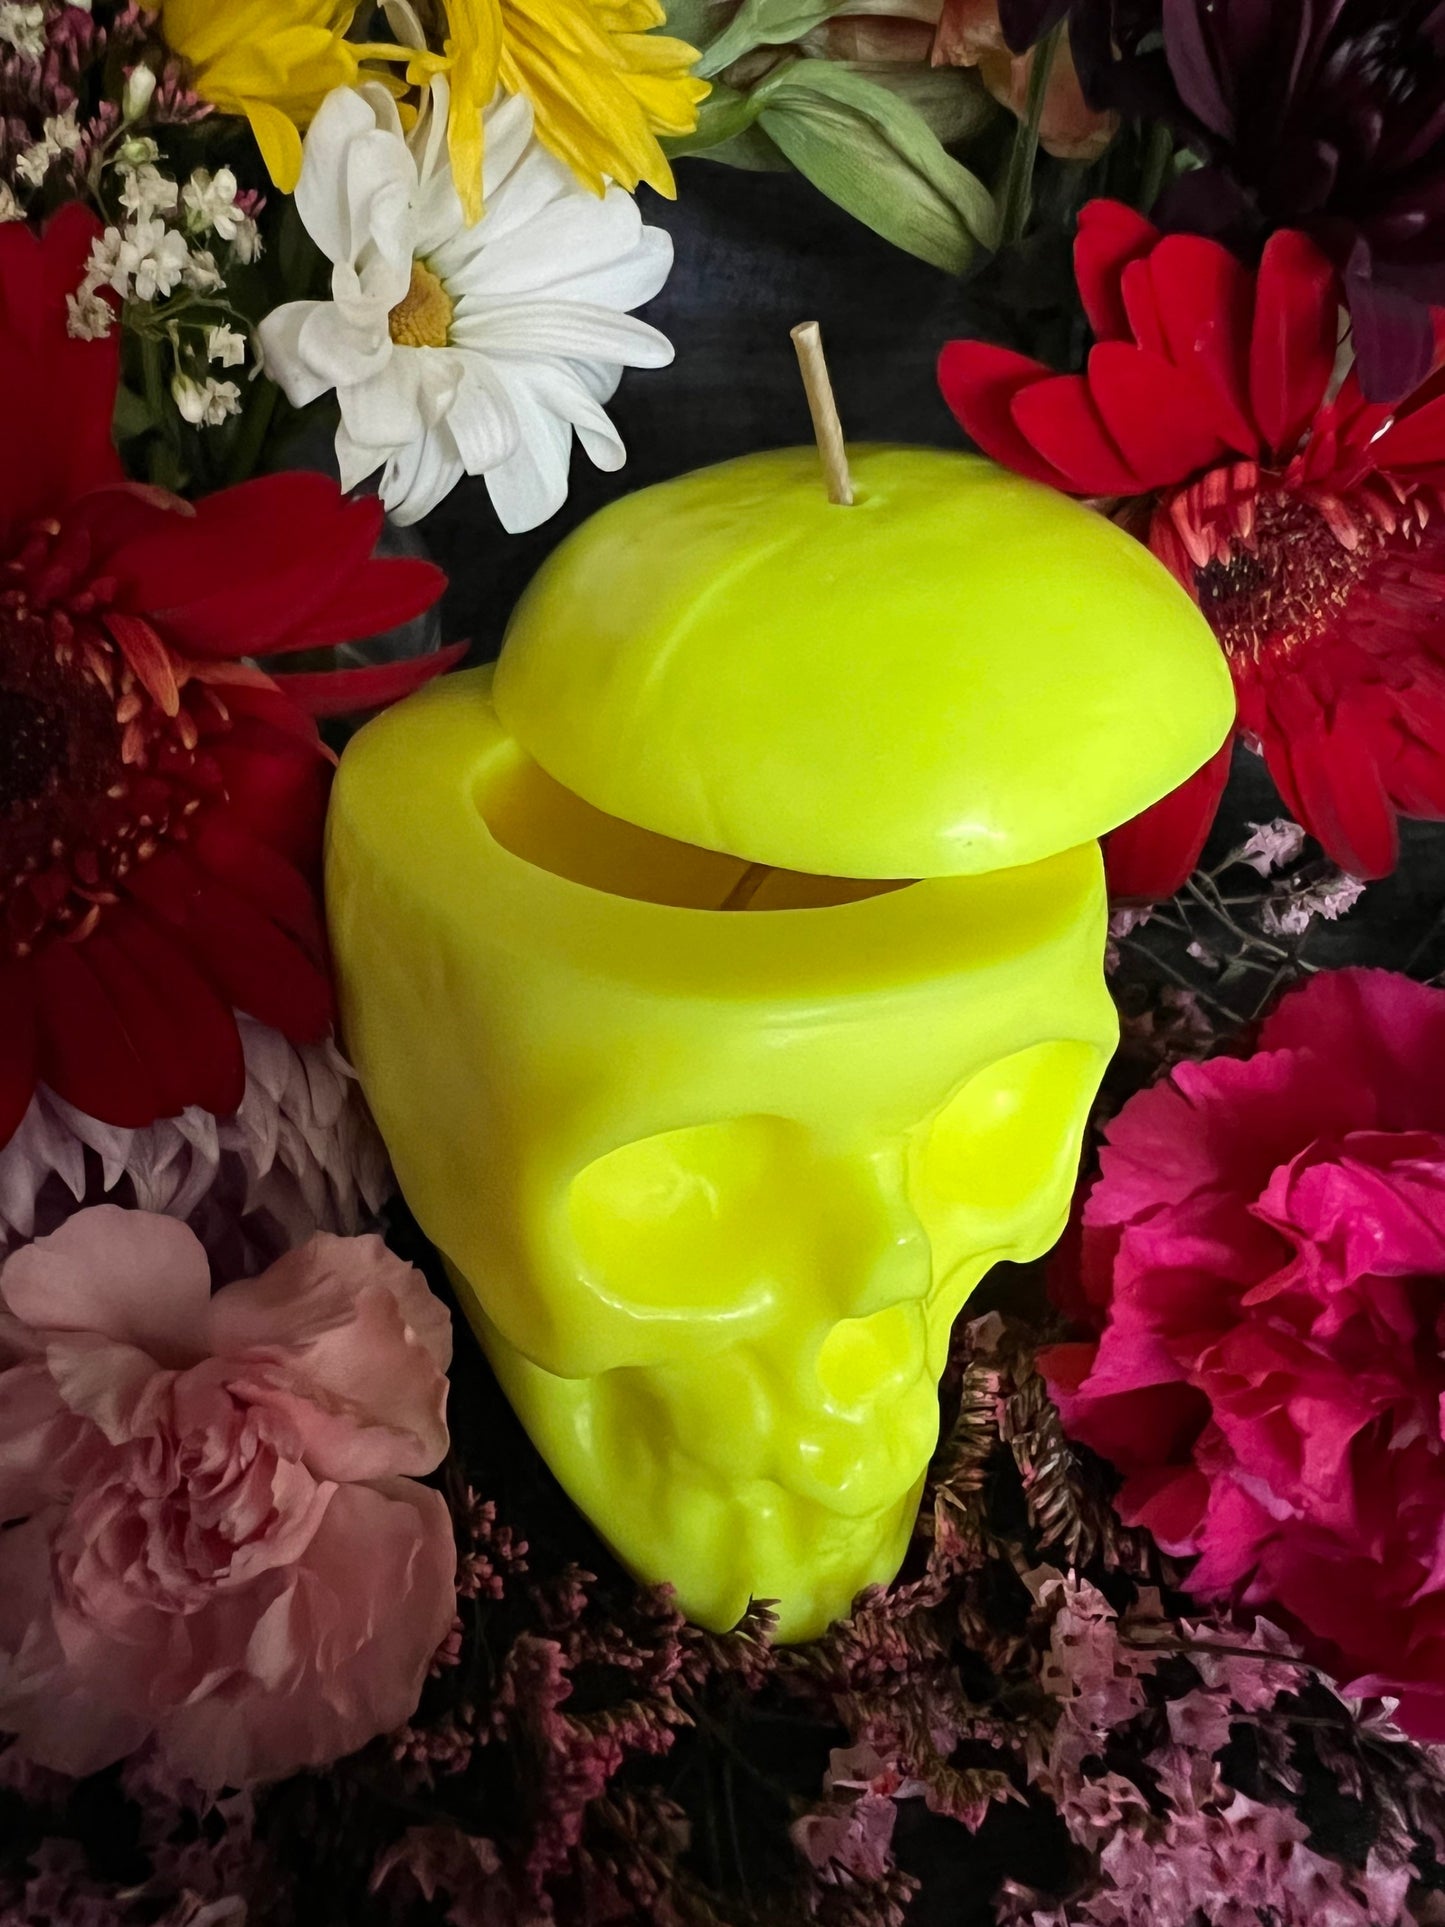 Neon Loadable Skull Candle + Influence Thoughts + Hoodoo + Voodoo + Conjure + Glows under Blacklight